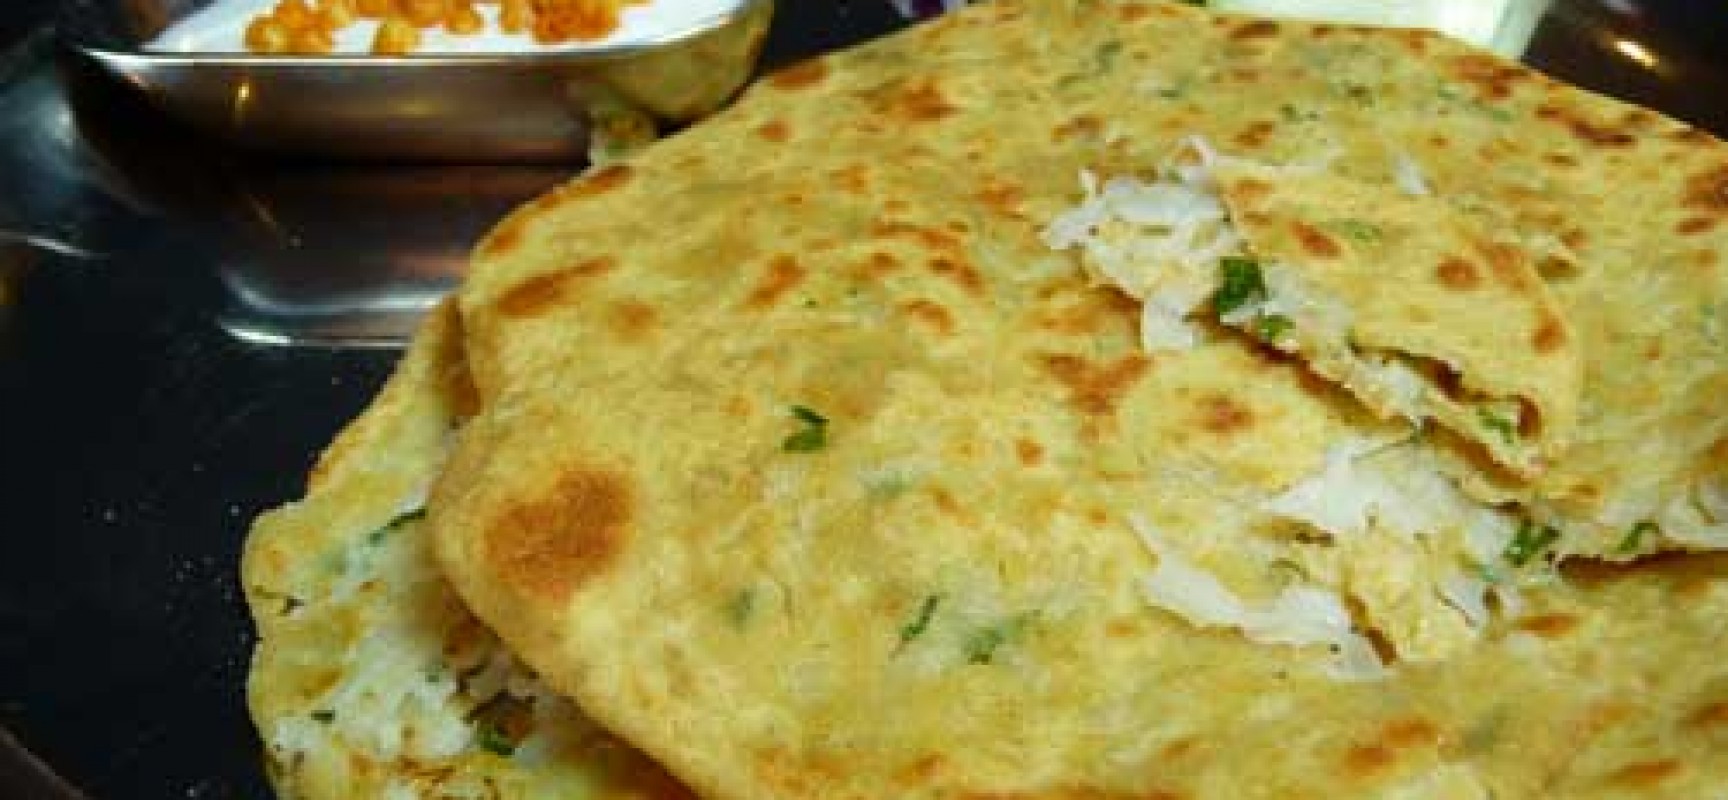 Stuffed Parathas from North India  !!!